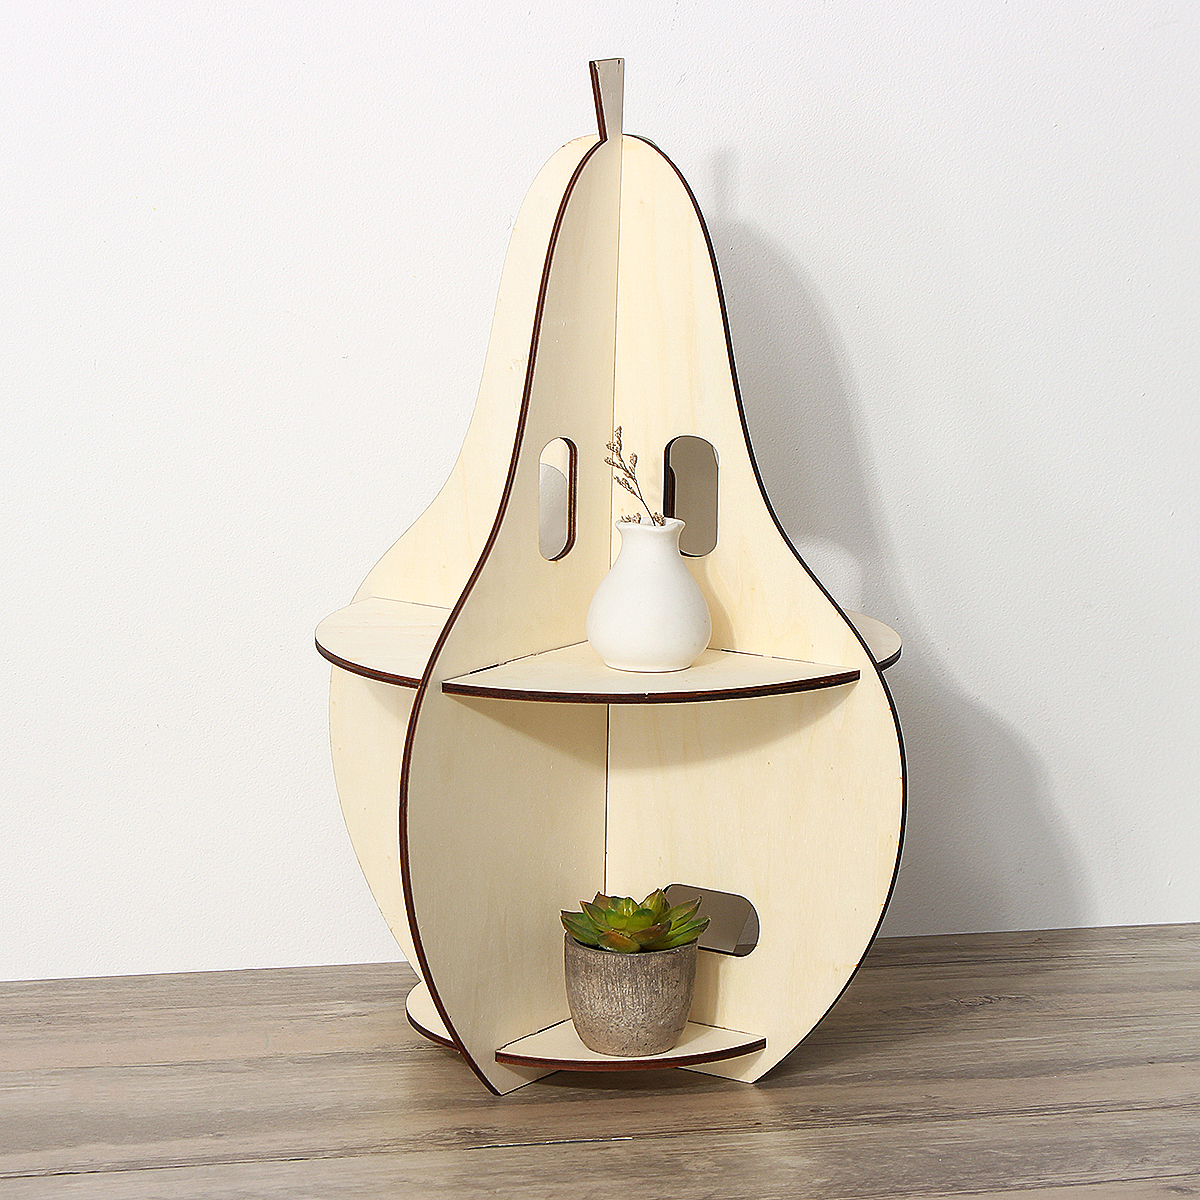 Wooden-Rack-Pear-shaped-Racks-Display-Craft-Shelf-Home-Decorations-Nordic-Style-Gift-1596581-7